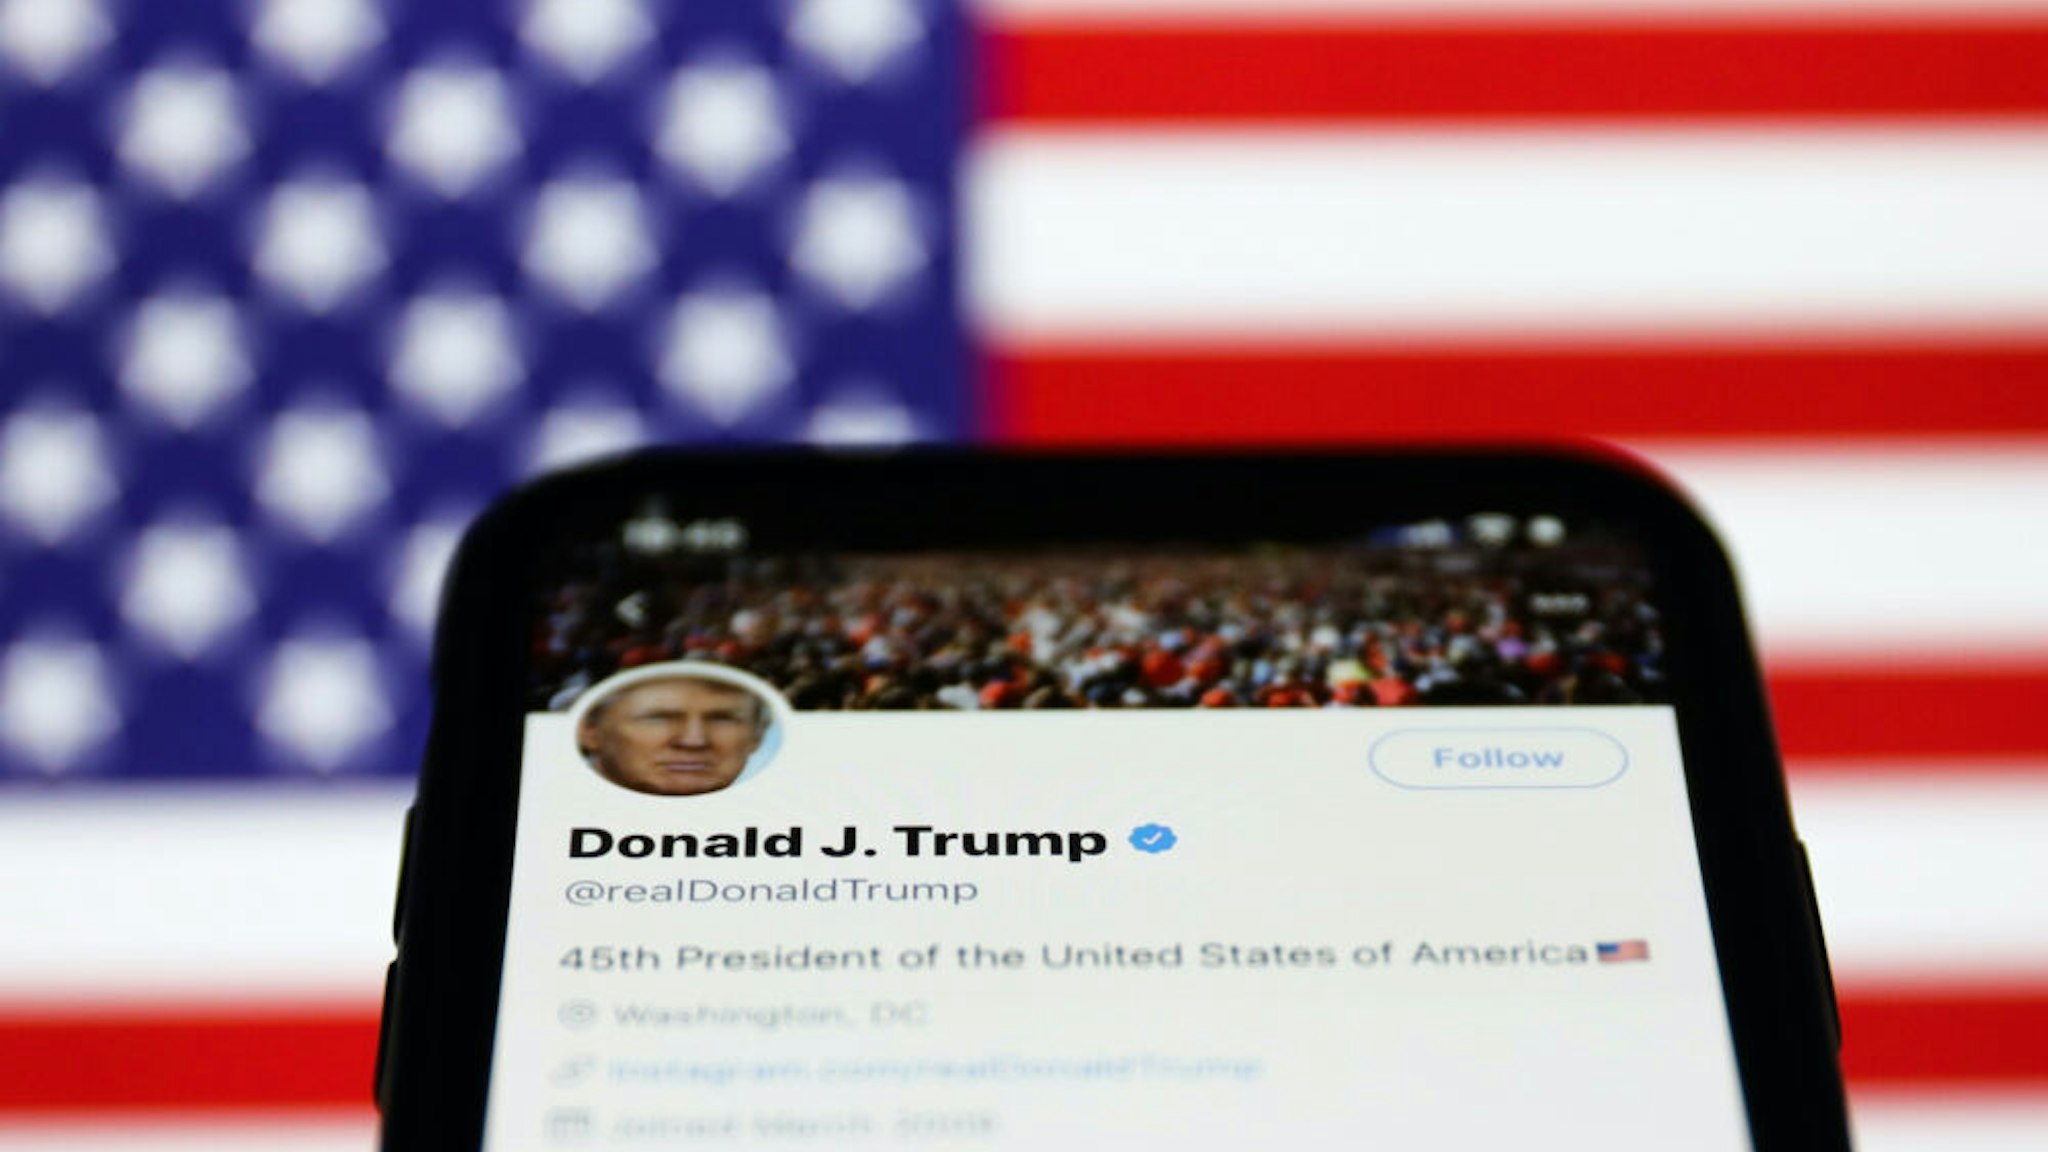 Twitter feed of the President of the USA Donald Trump is seen displayed on a phone screen with American flag in the background in this illustration photo taken on October 18, 2020. (Photo Illustration by Jakub Porzycki/NurPhoto via Getty Images)